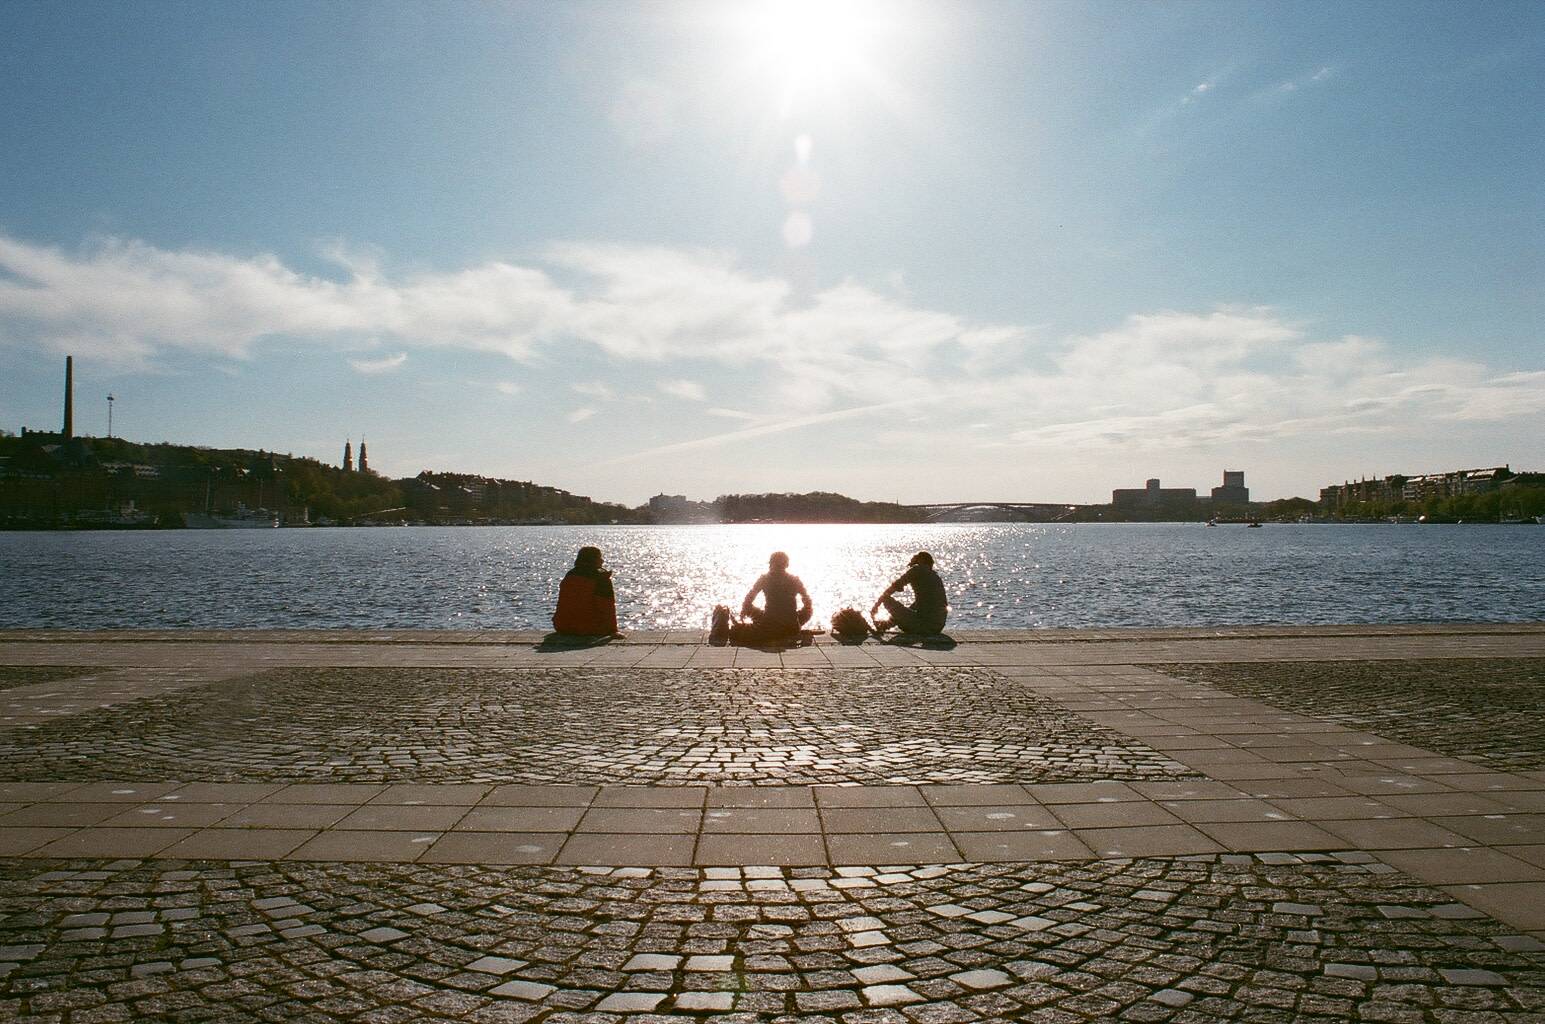 three people sitting next to the river under the sunny blue sky